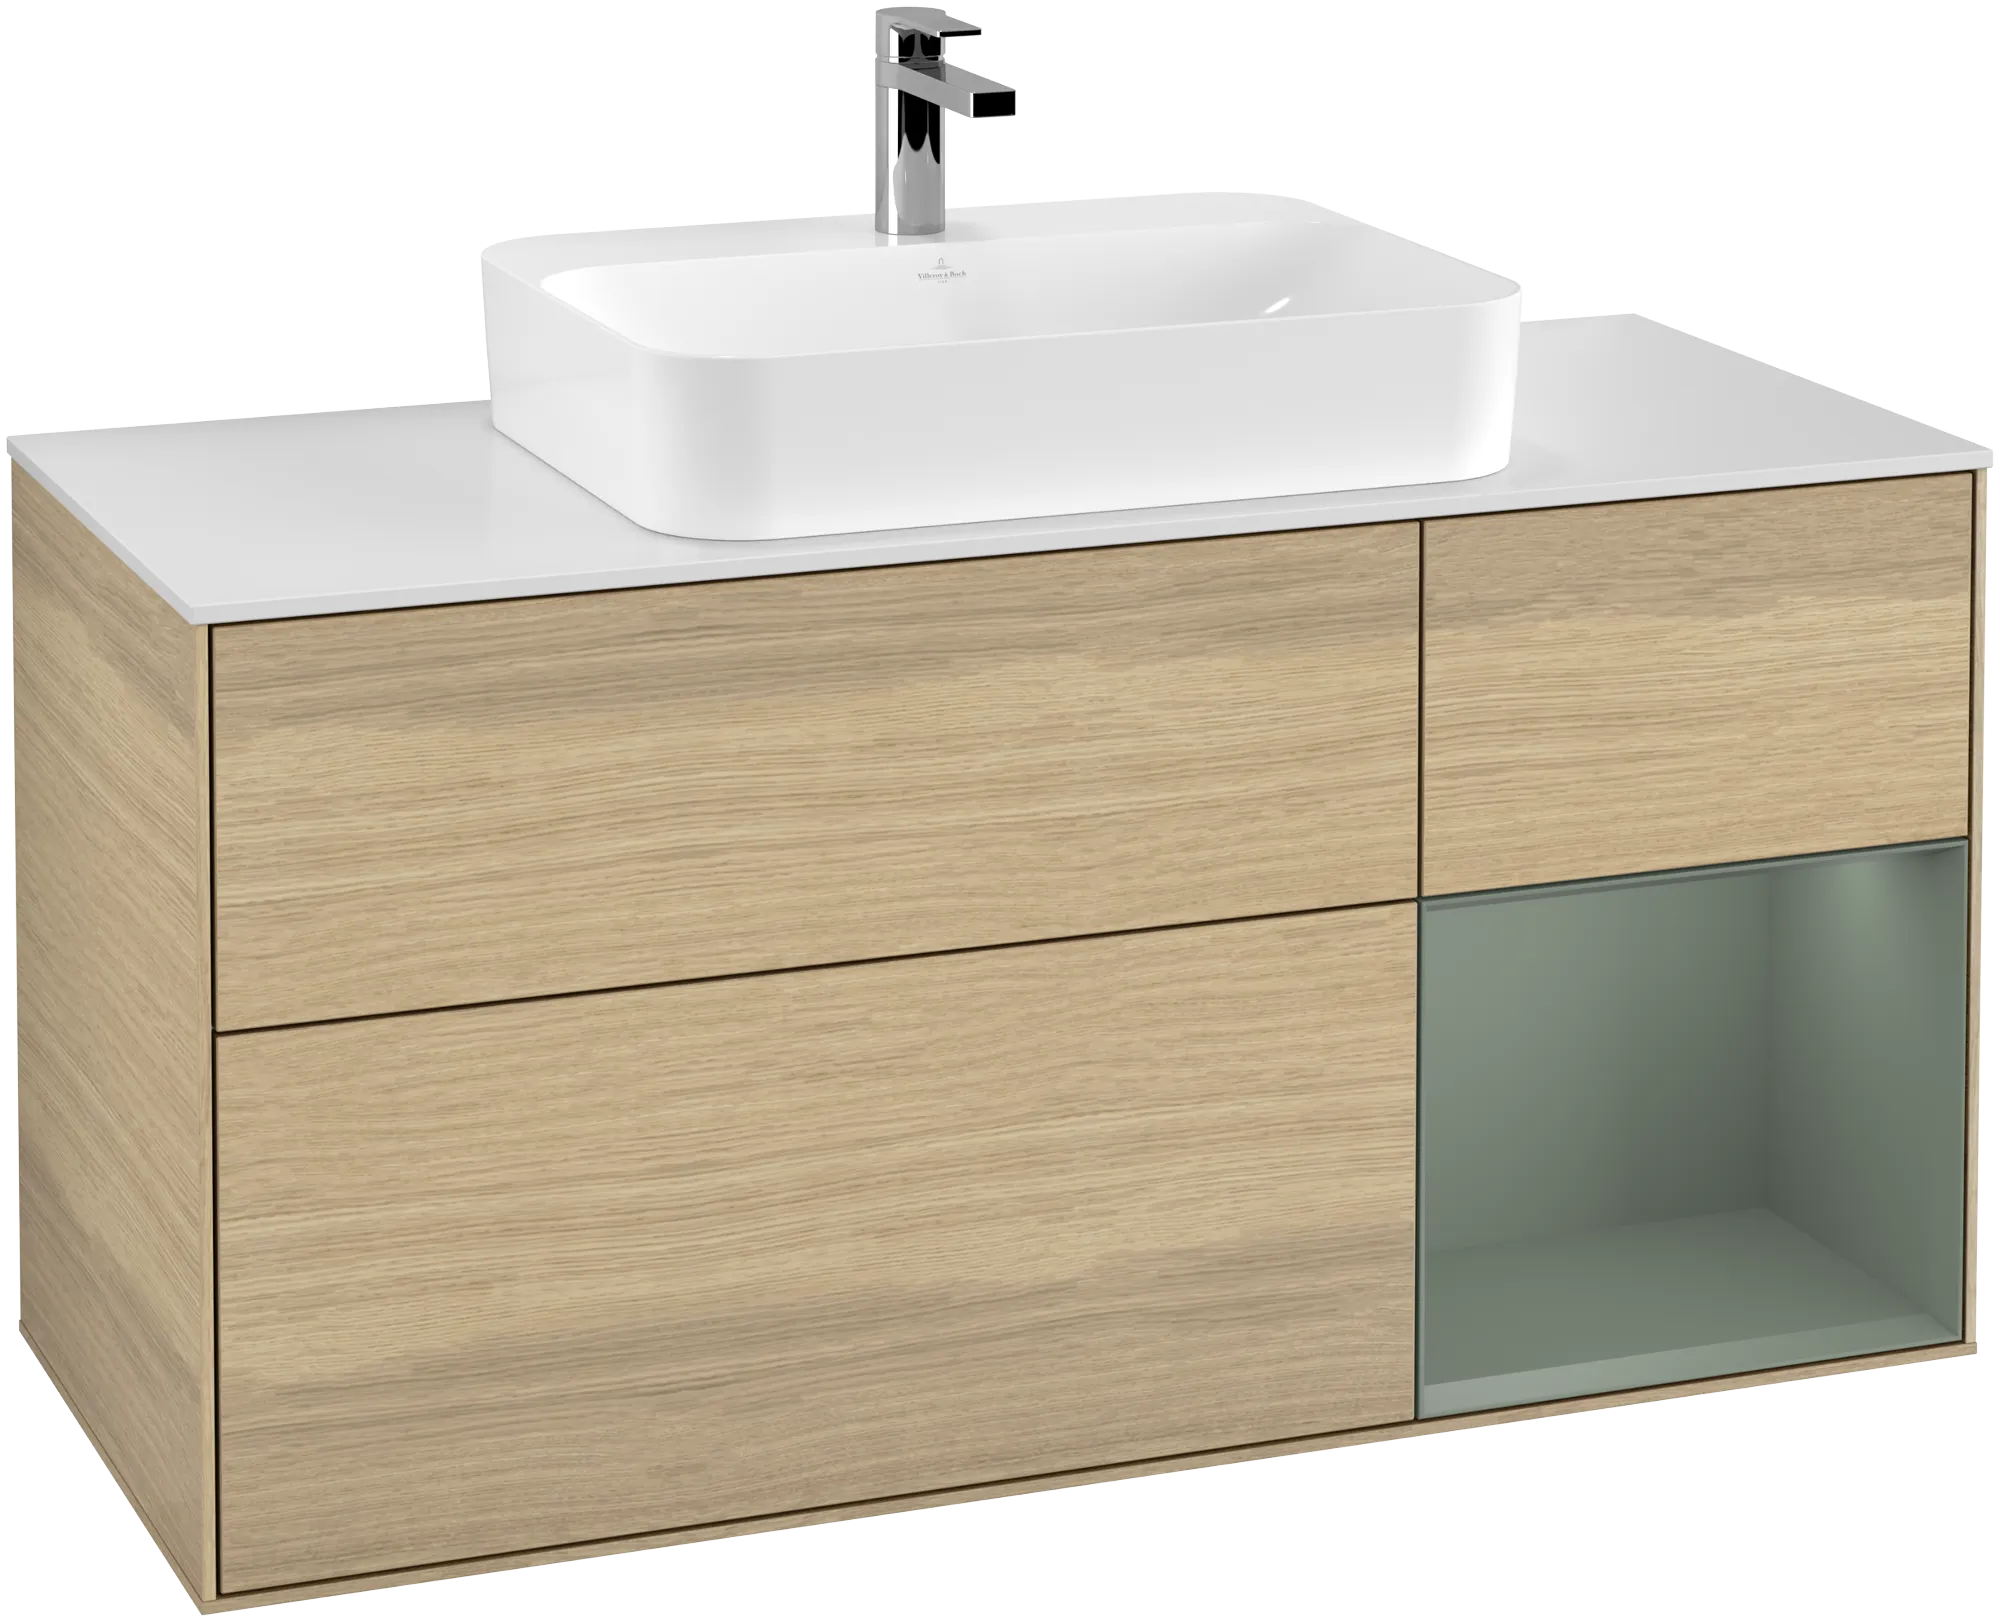 Picture of VILLEROY BOCH Finion Vanity unit, with lighting, 3 pull-out compartments, 1200 x 603 x 501 mm, Oak Veneer / Olive Matt Lacquer / Glass White Matt #G421GMPC